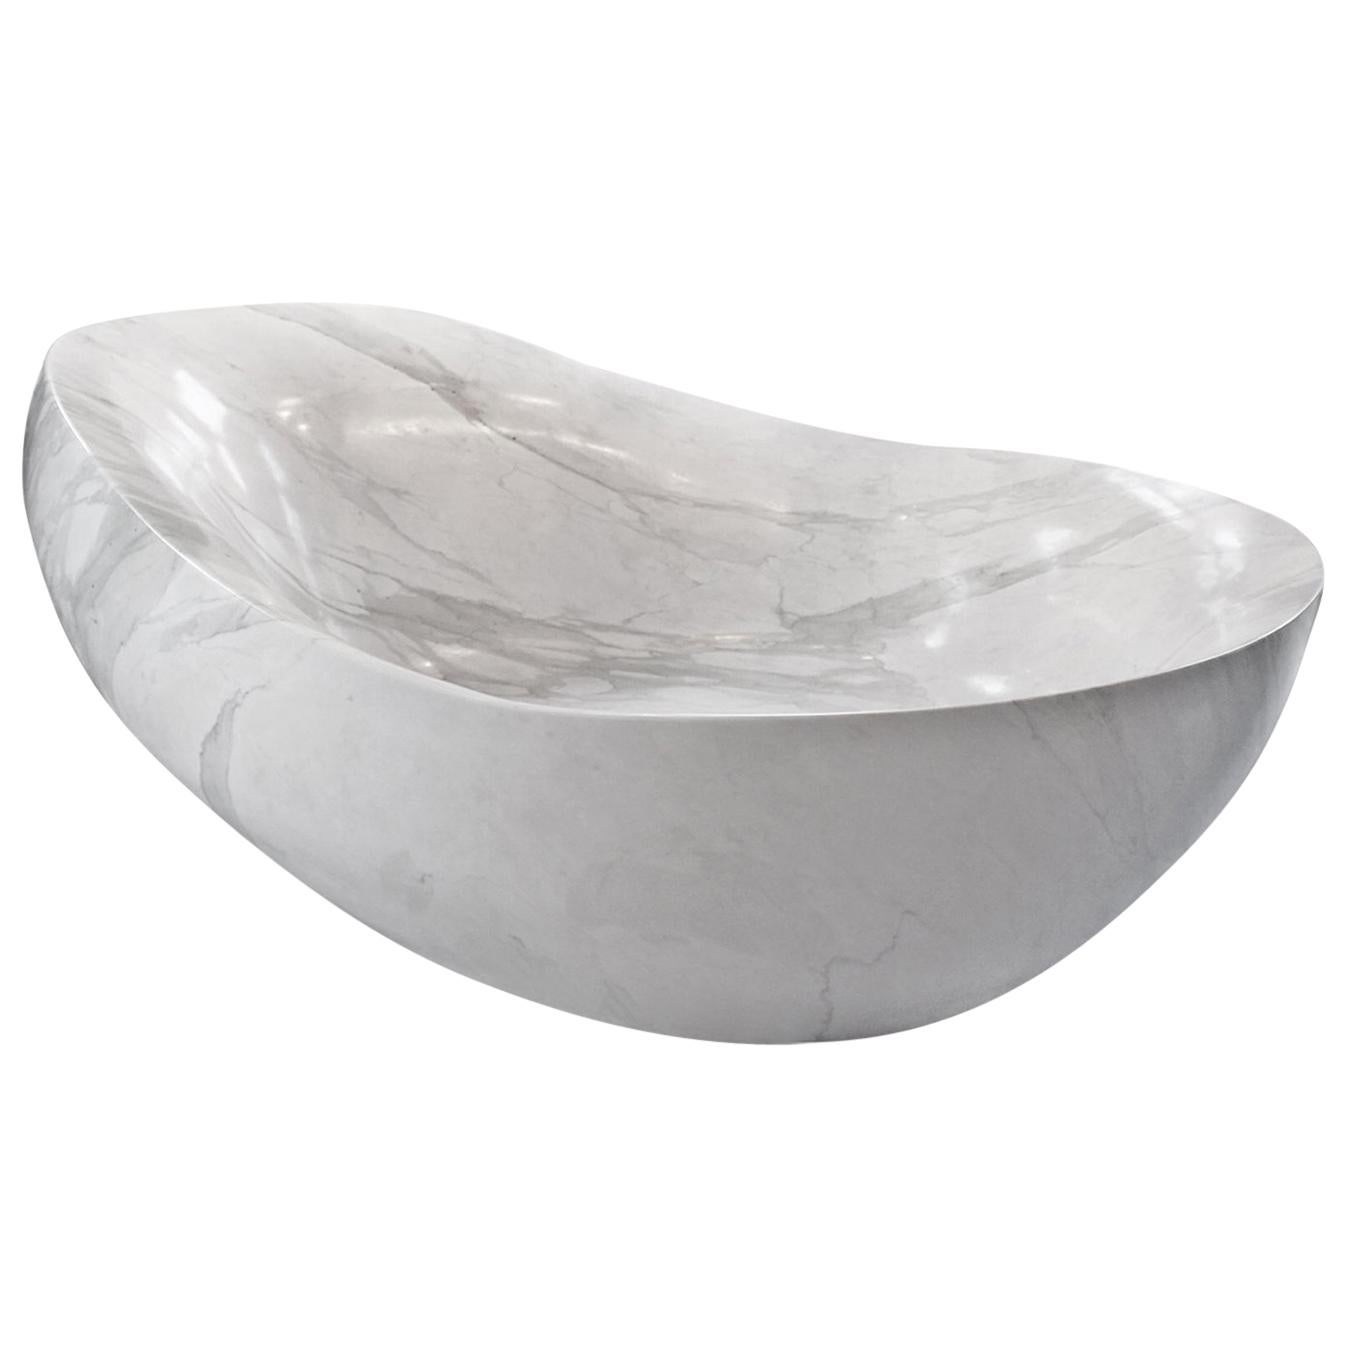 21st Century Home Design White Calacatta Marble Bath Holds 5 People For Sale